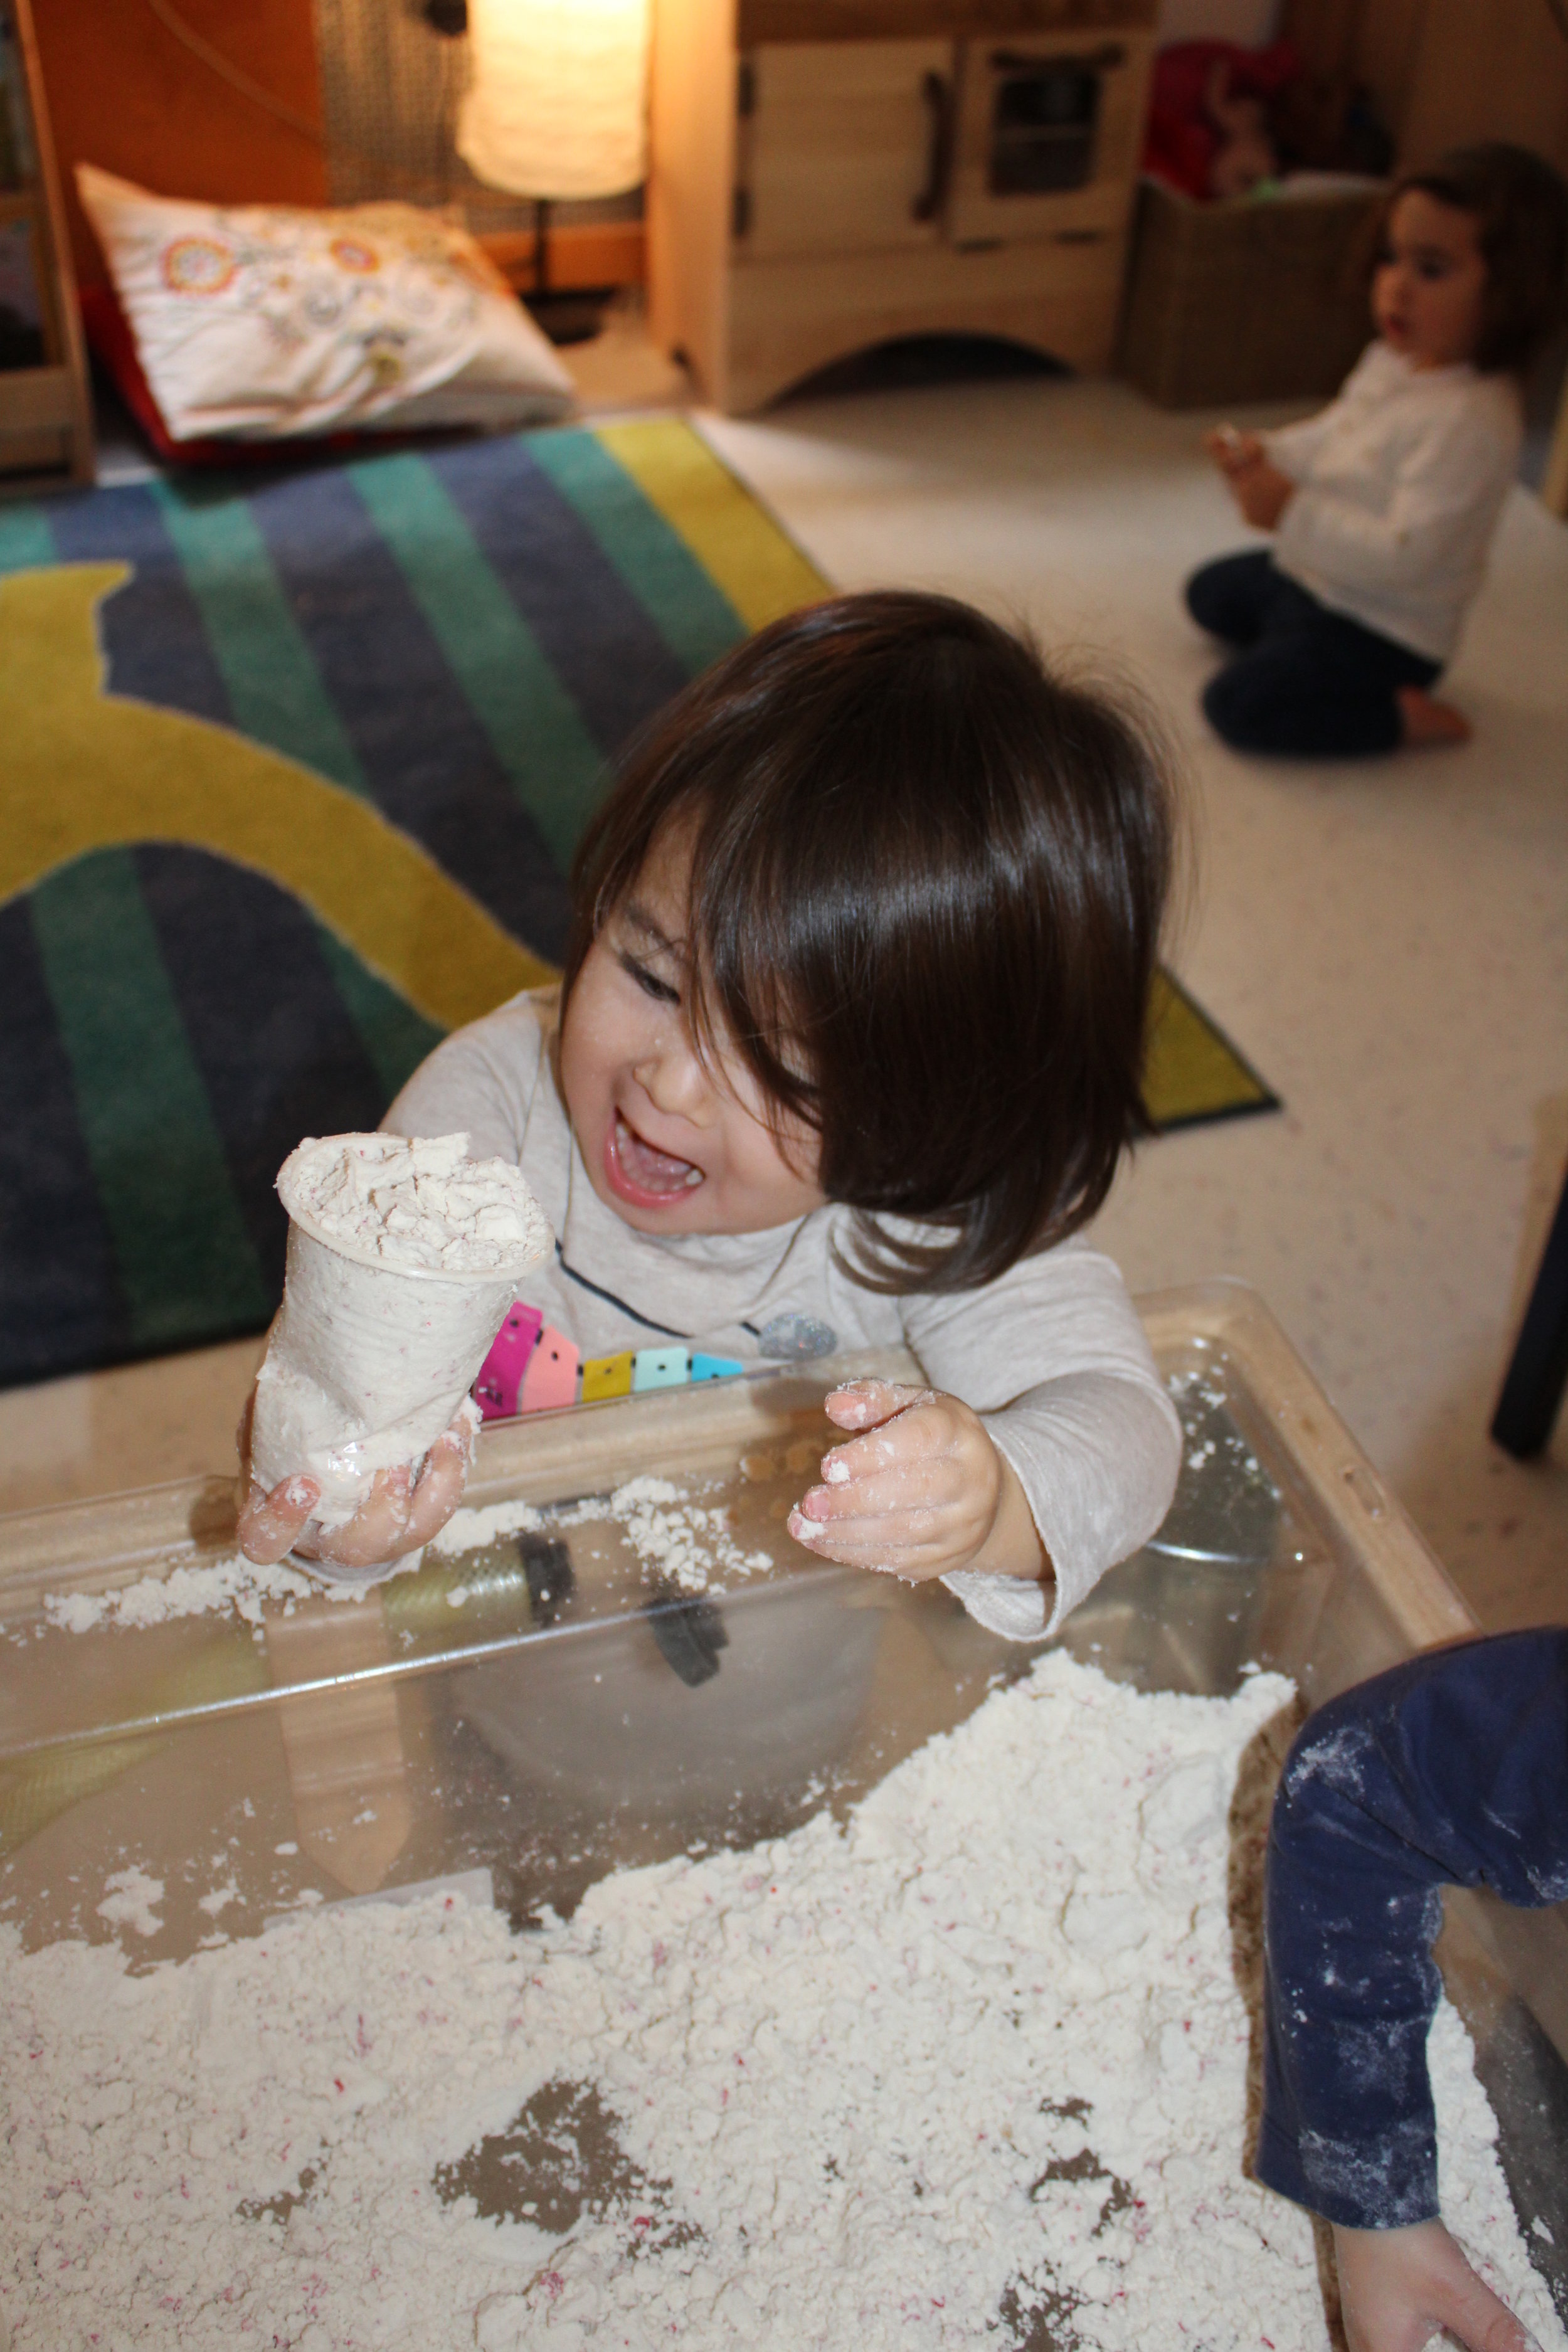  The children are familiar with this sensory activity, Cloud Dough!&nbsp; The consistency of the dough is interesting to feel and hold.&nbsp;It can be powdery like flour one moment,&nbsp;and moldable (like damp sand) the next.&nbsp; &nbsp;Rheya, Edie